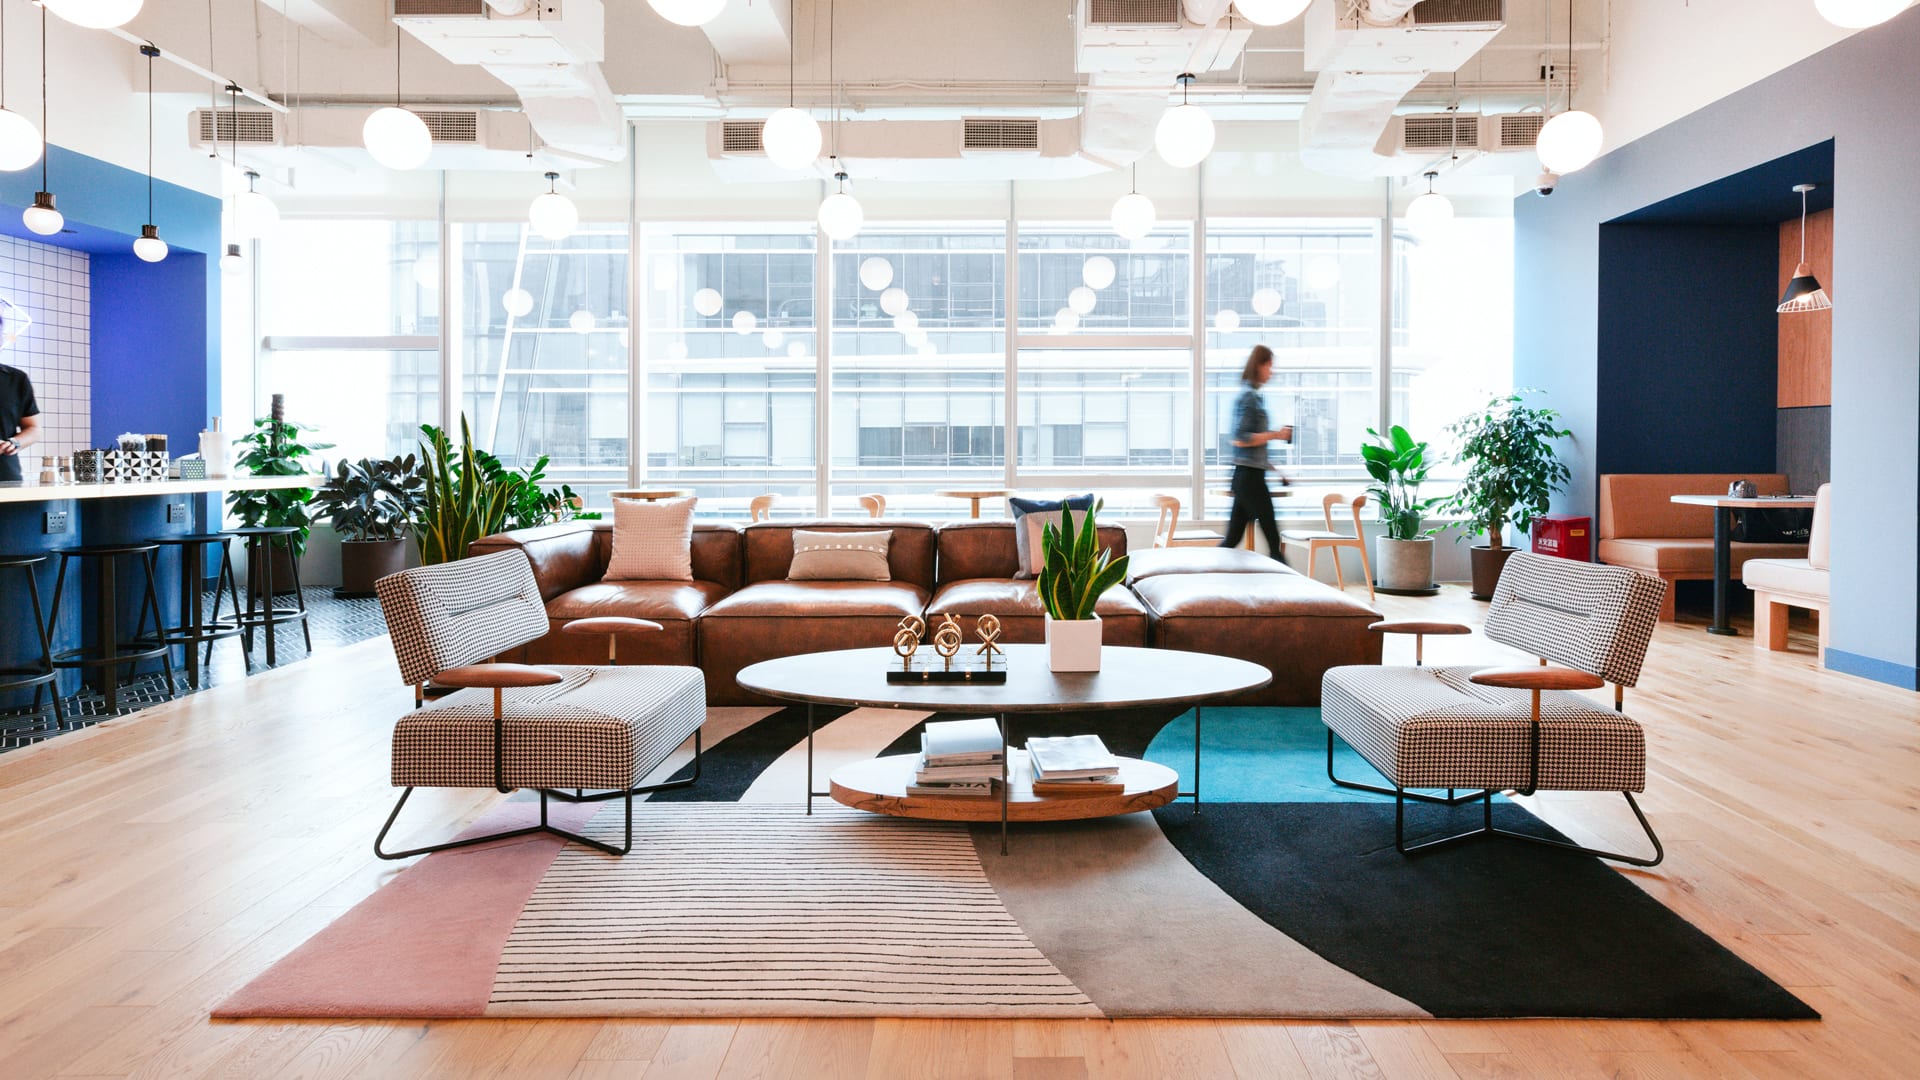 The We Company wants to cash in on “the WeWork effect,” too